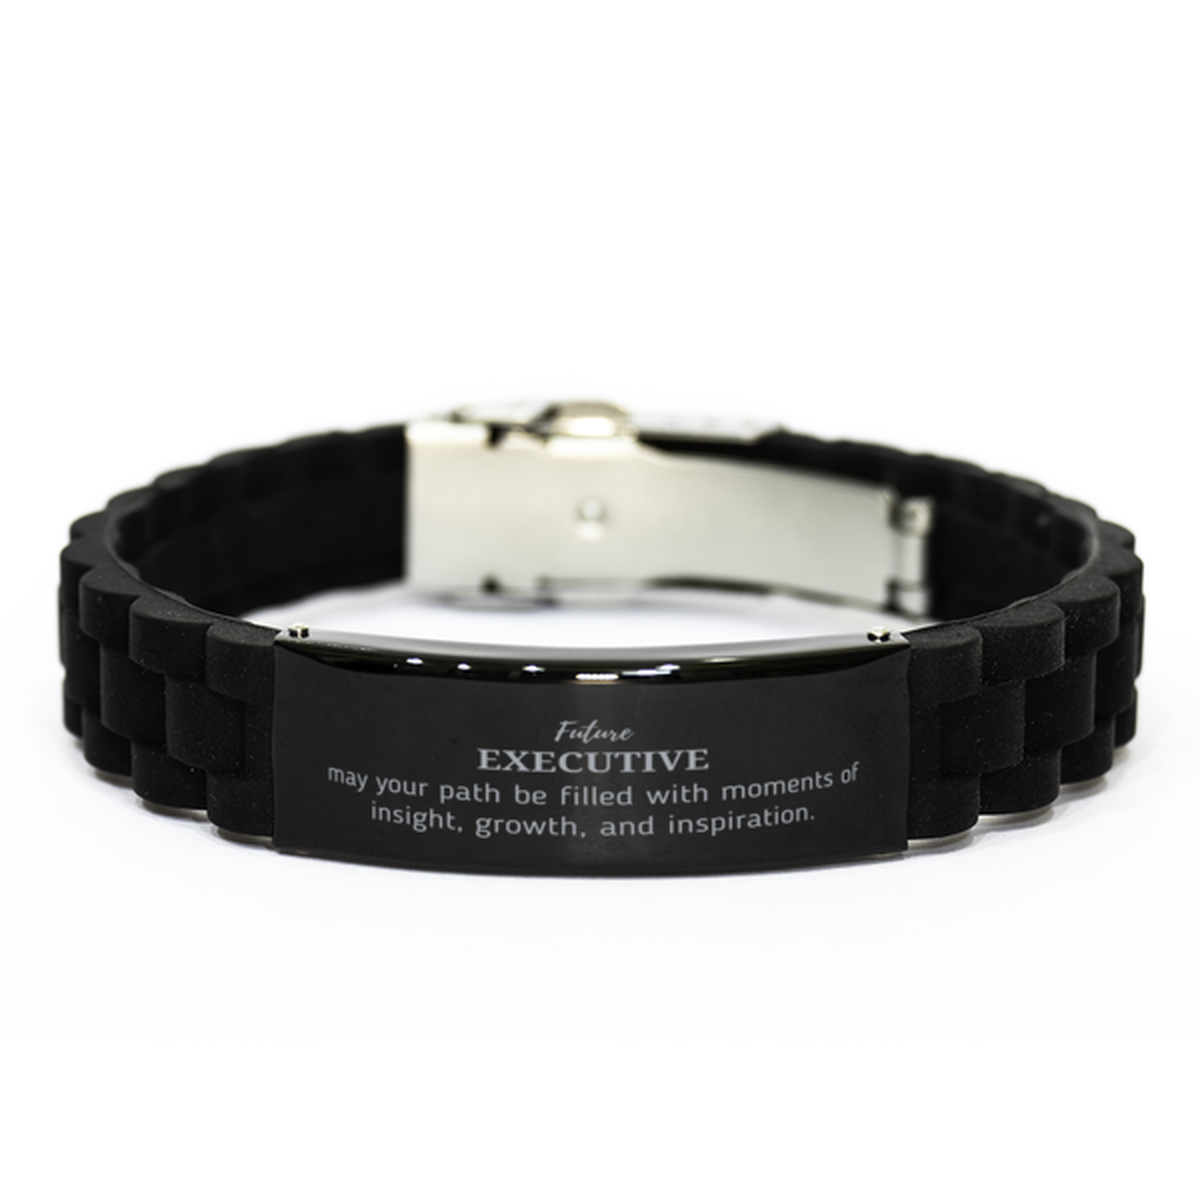 Future Executive Gifts, May your path be filled with moments of insight, Graduation Gifts for New Executive, Christmas Unique Black Glidelock Clasp Bracelet For Men, Women, Friends